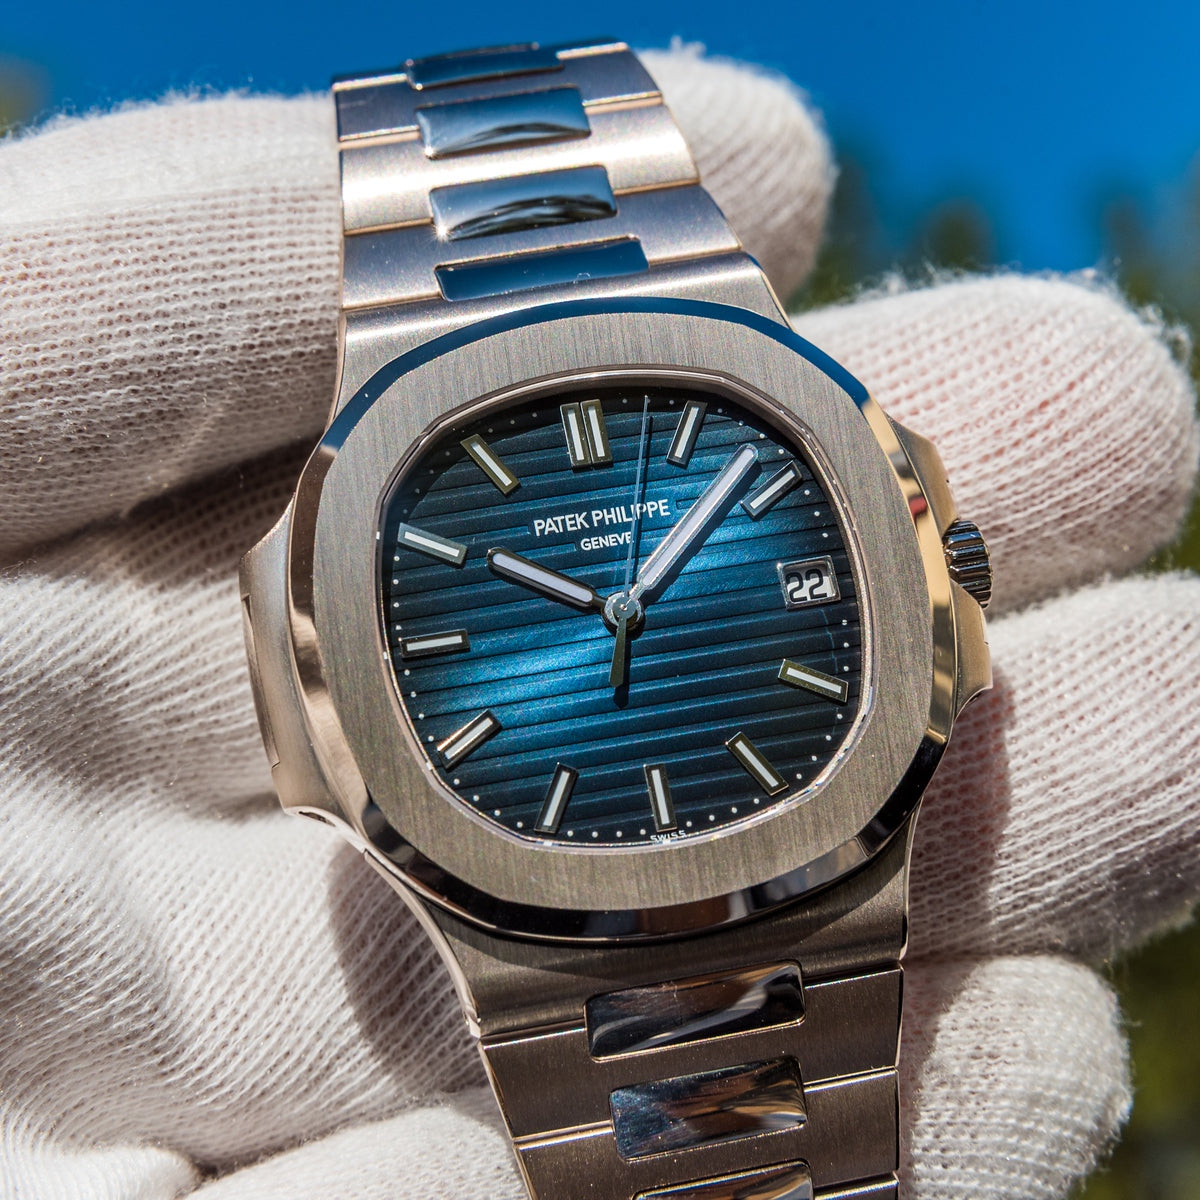 Patek Philippe Nautilus featuring a blue baton dial with a specia